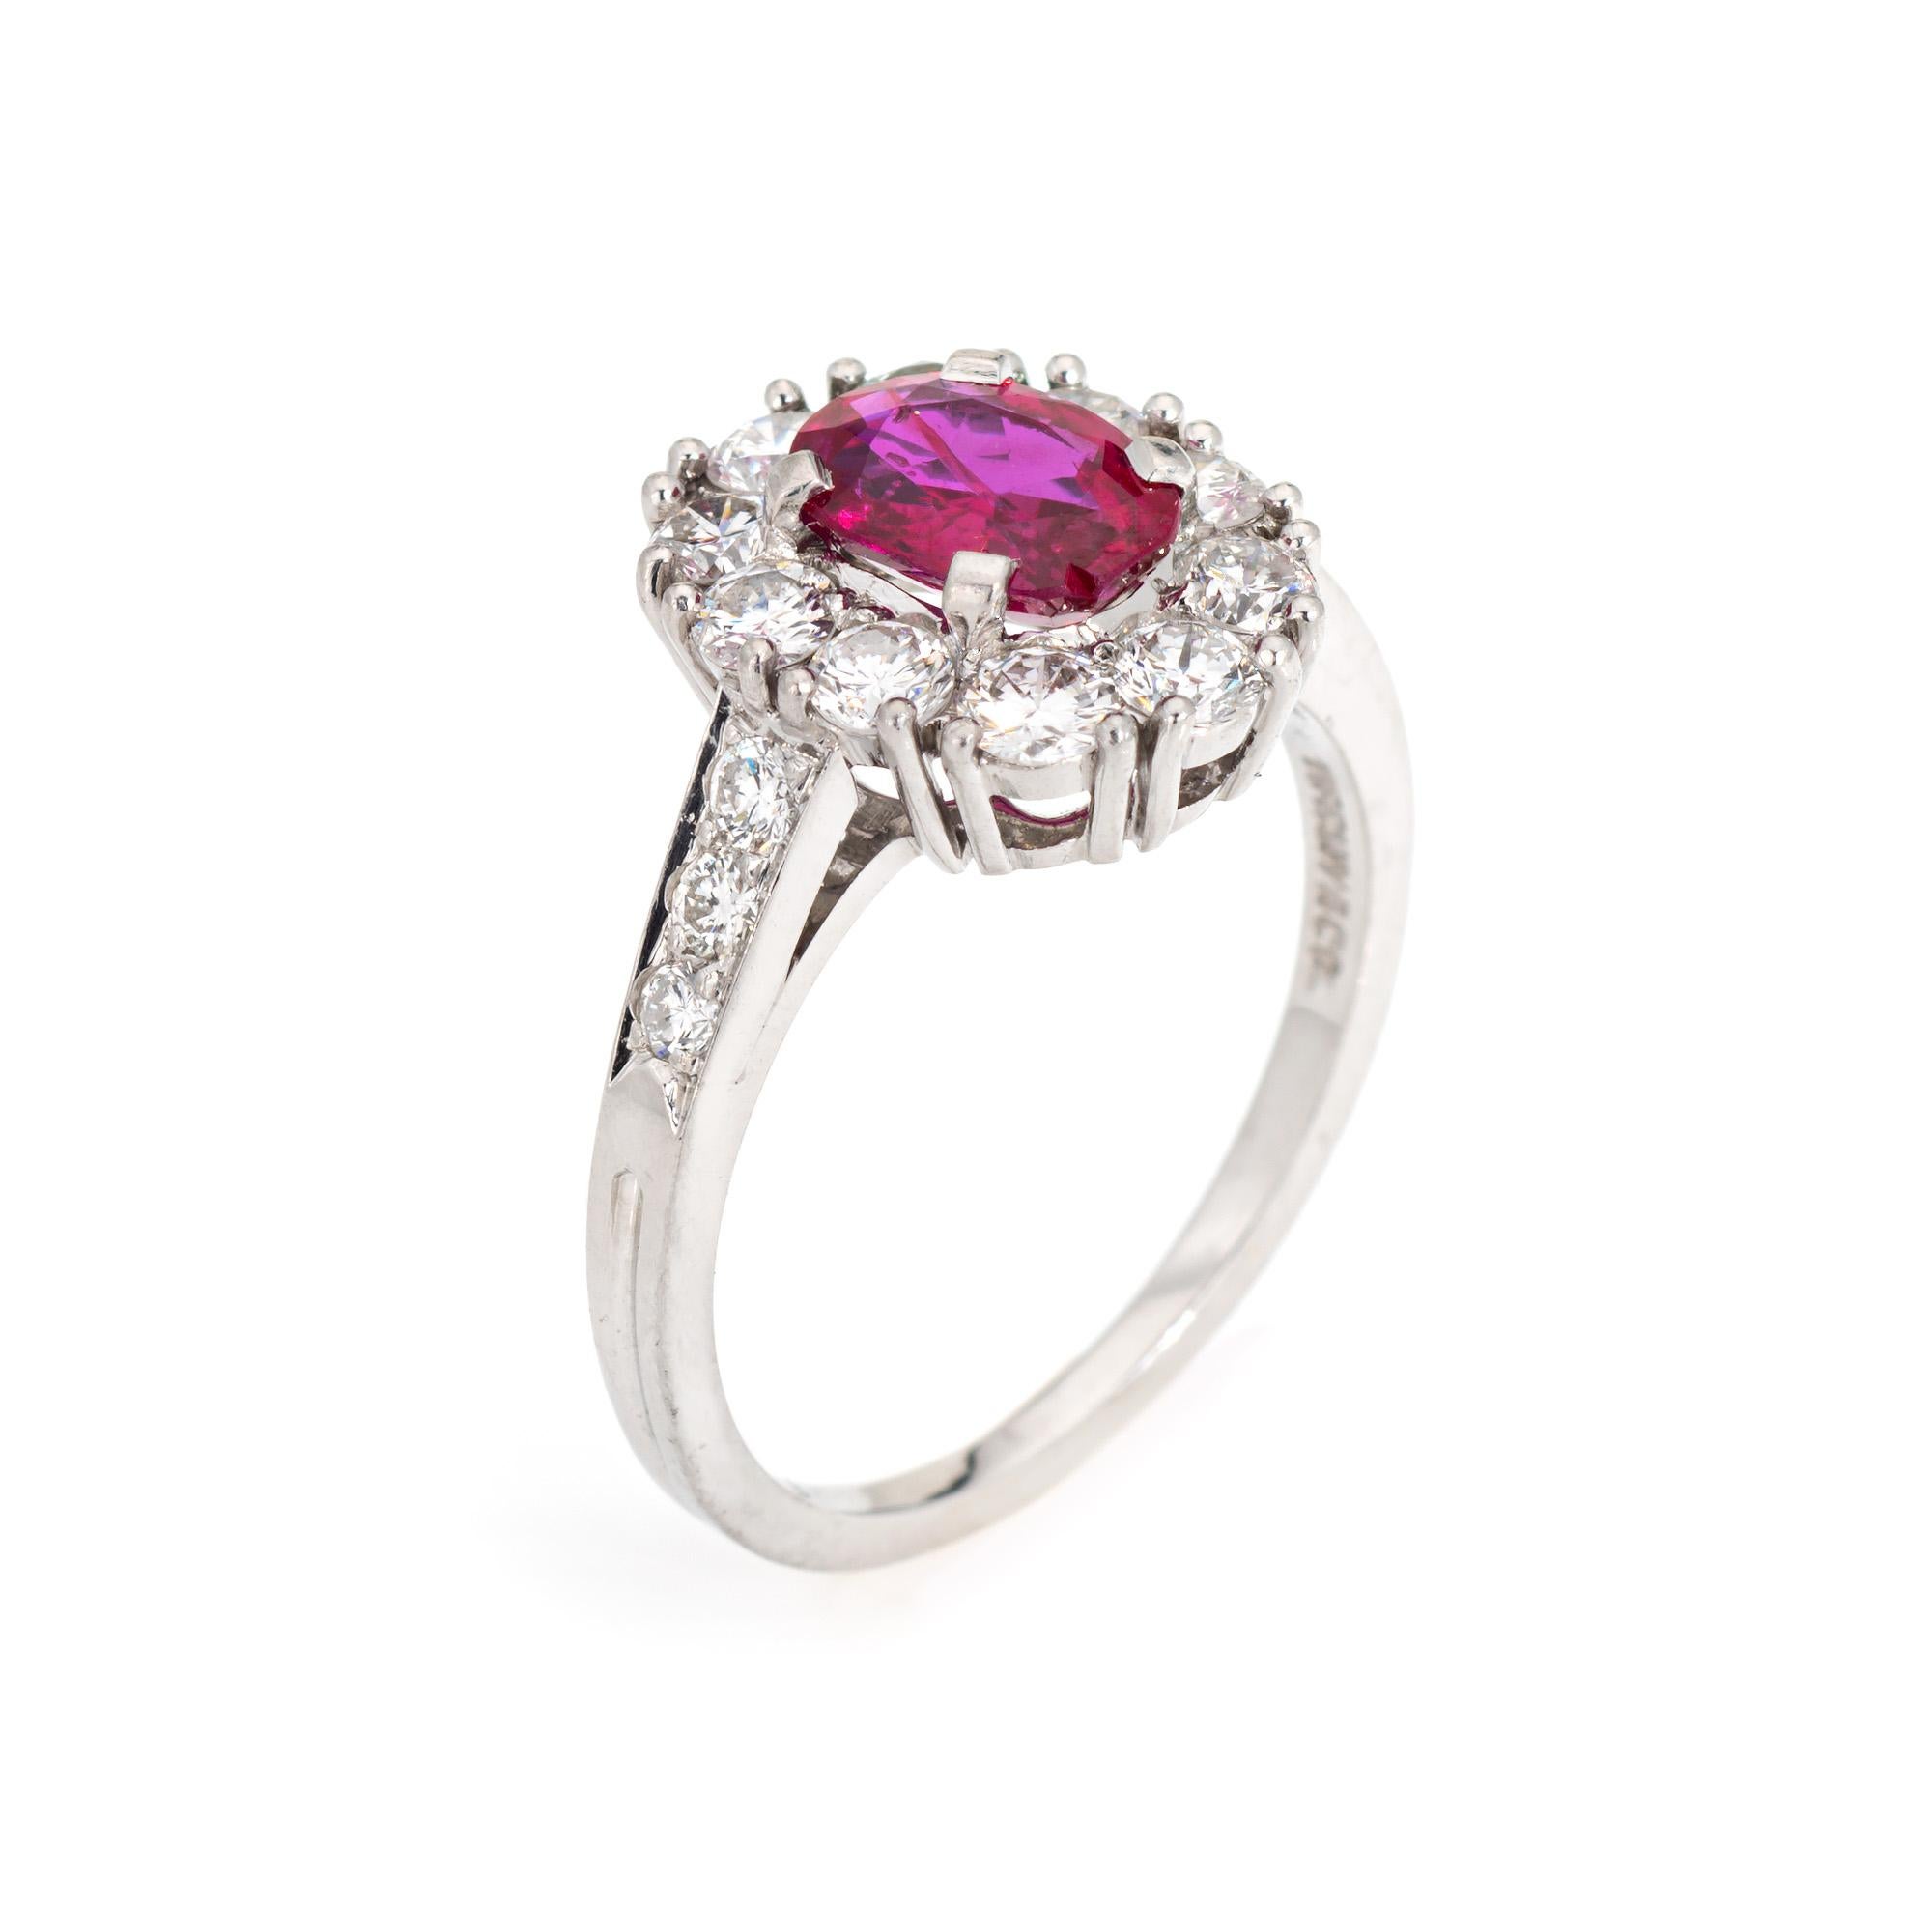 Vintage Tiffany & Co ruby & diamond cluster ring crafted in 900 platinum (circa 1960s).  

Oval mixed cut natural ruby measures 7.1 x 5.4 x 3.0mm (estimated at 1 carat). Color and inclusions are typical of rubies from Burma (Myanmar). There is no